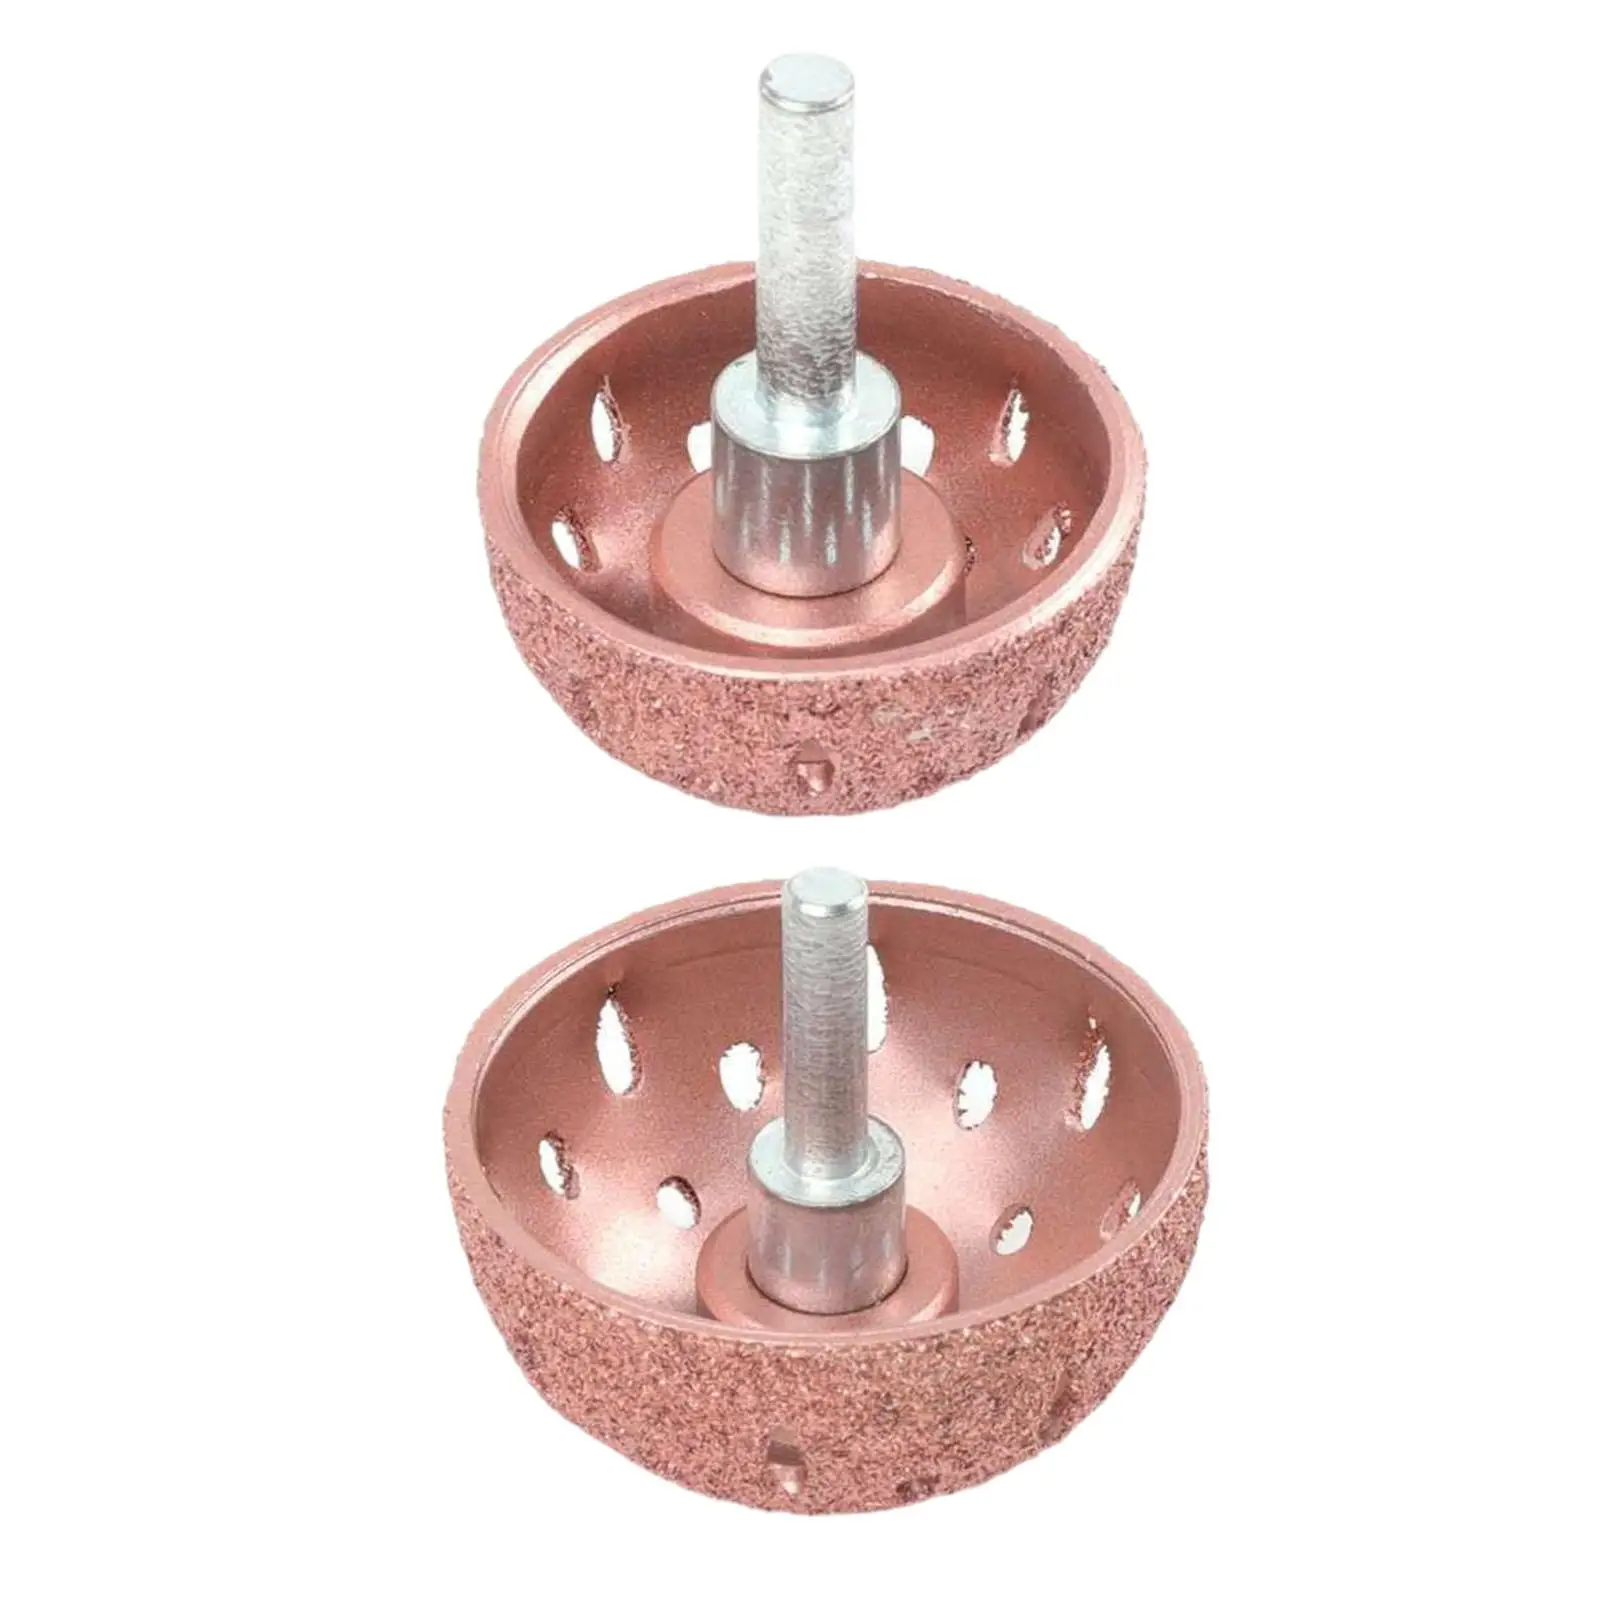 

Generic Tire Repair Grinding Head Sturdy Professional Automotive Power Tool Parts High Strength Tungsten Steel Buffing Wheel